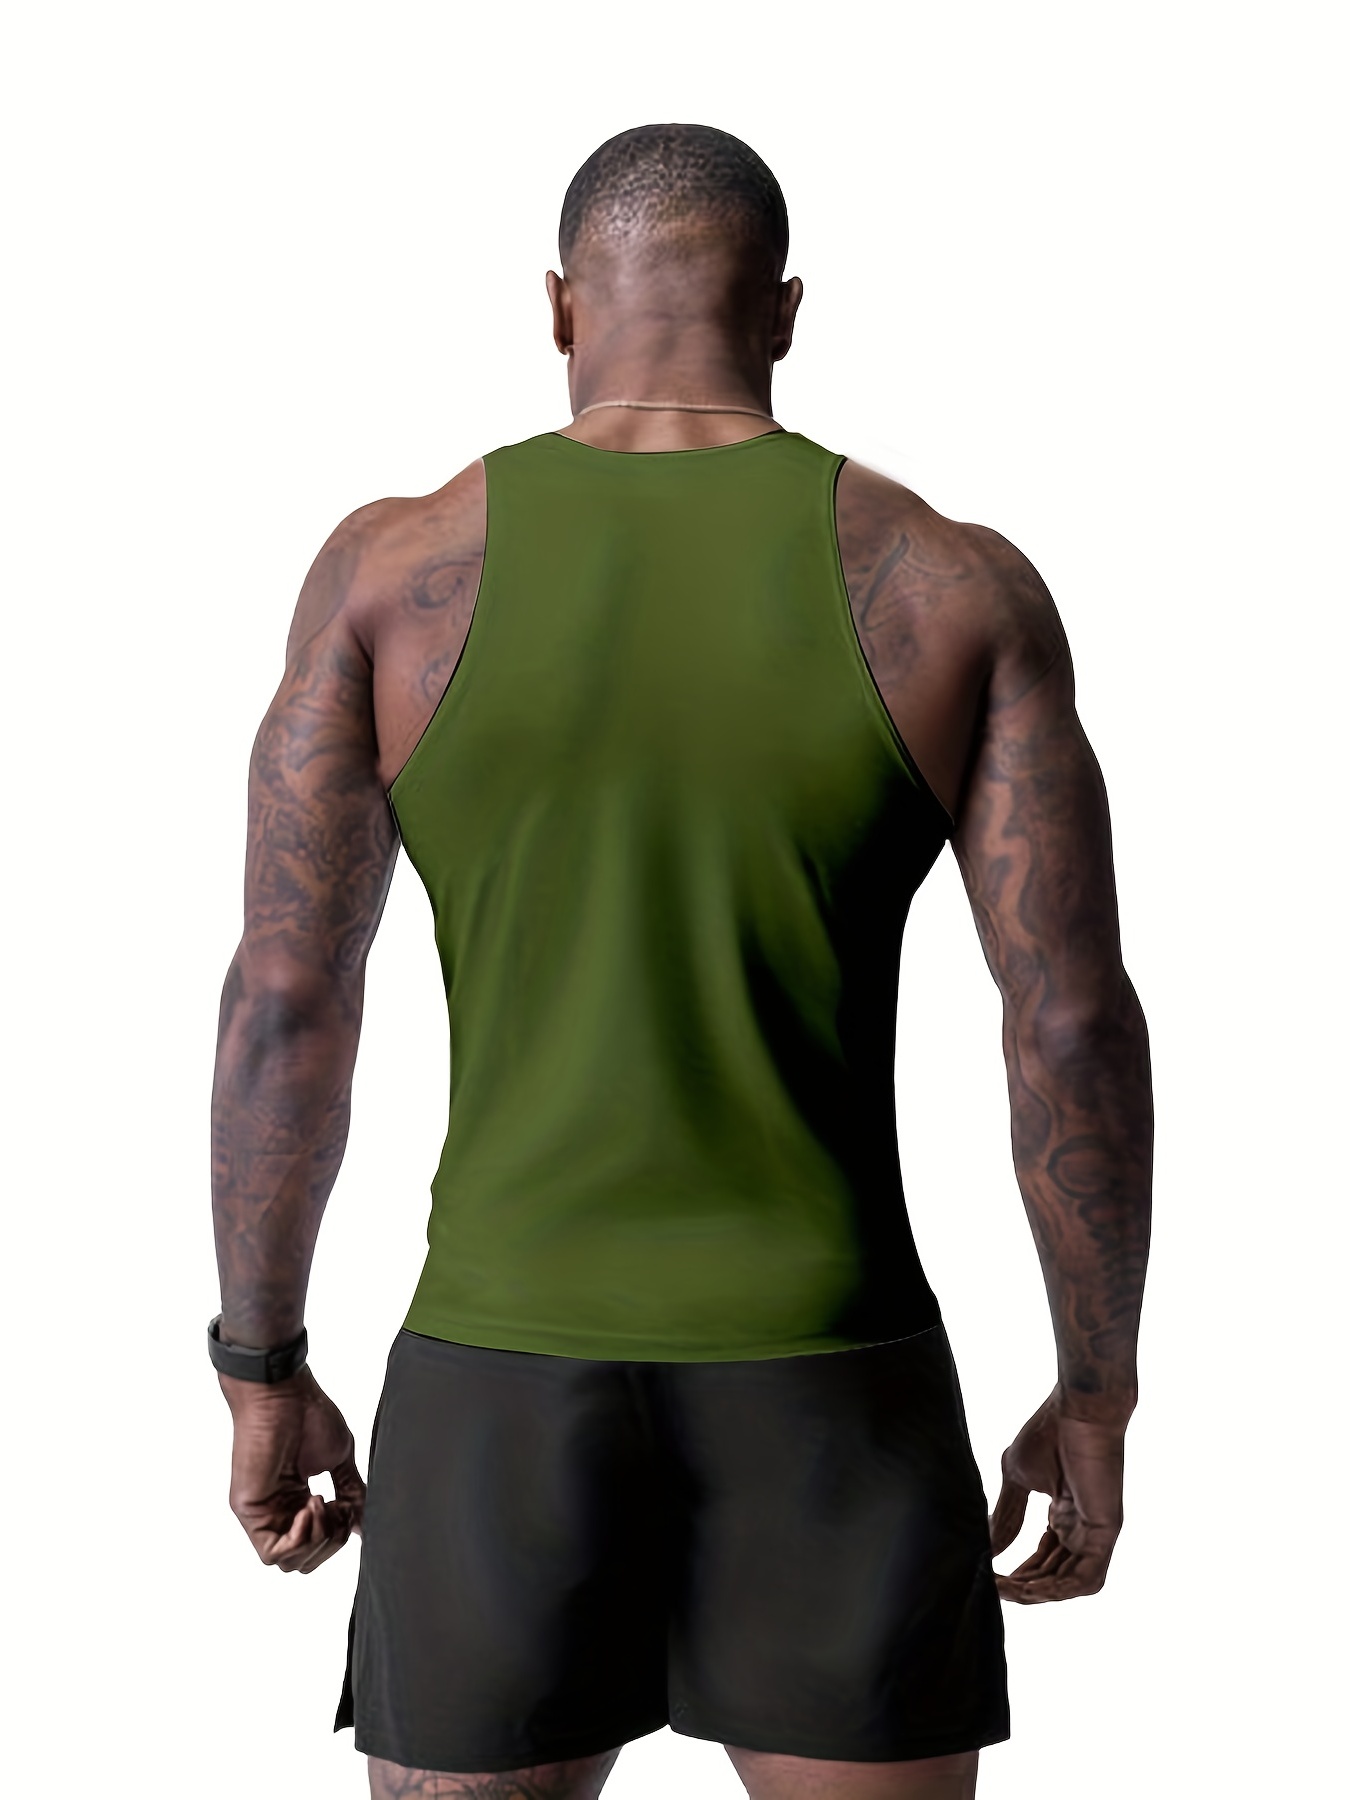 Mens Breathable Tank Top, Sleeveless Slim Fit Camouflage Summer Sportswear,  Quick Dry Male Bodybuilding Muscle Shirt 